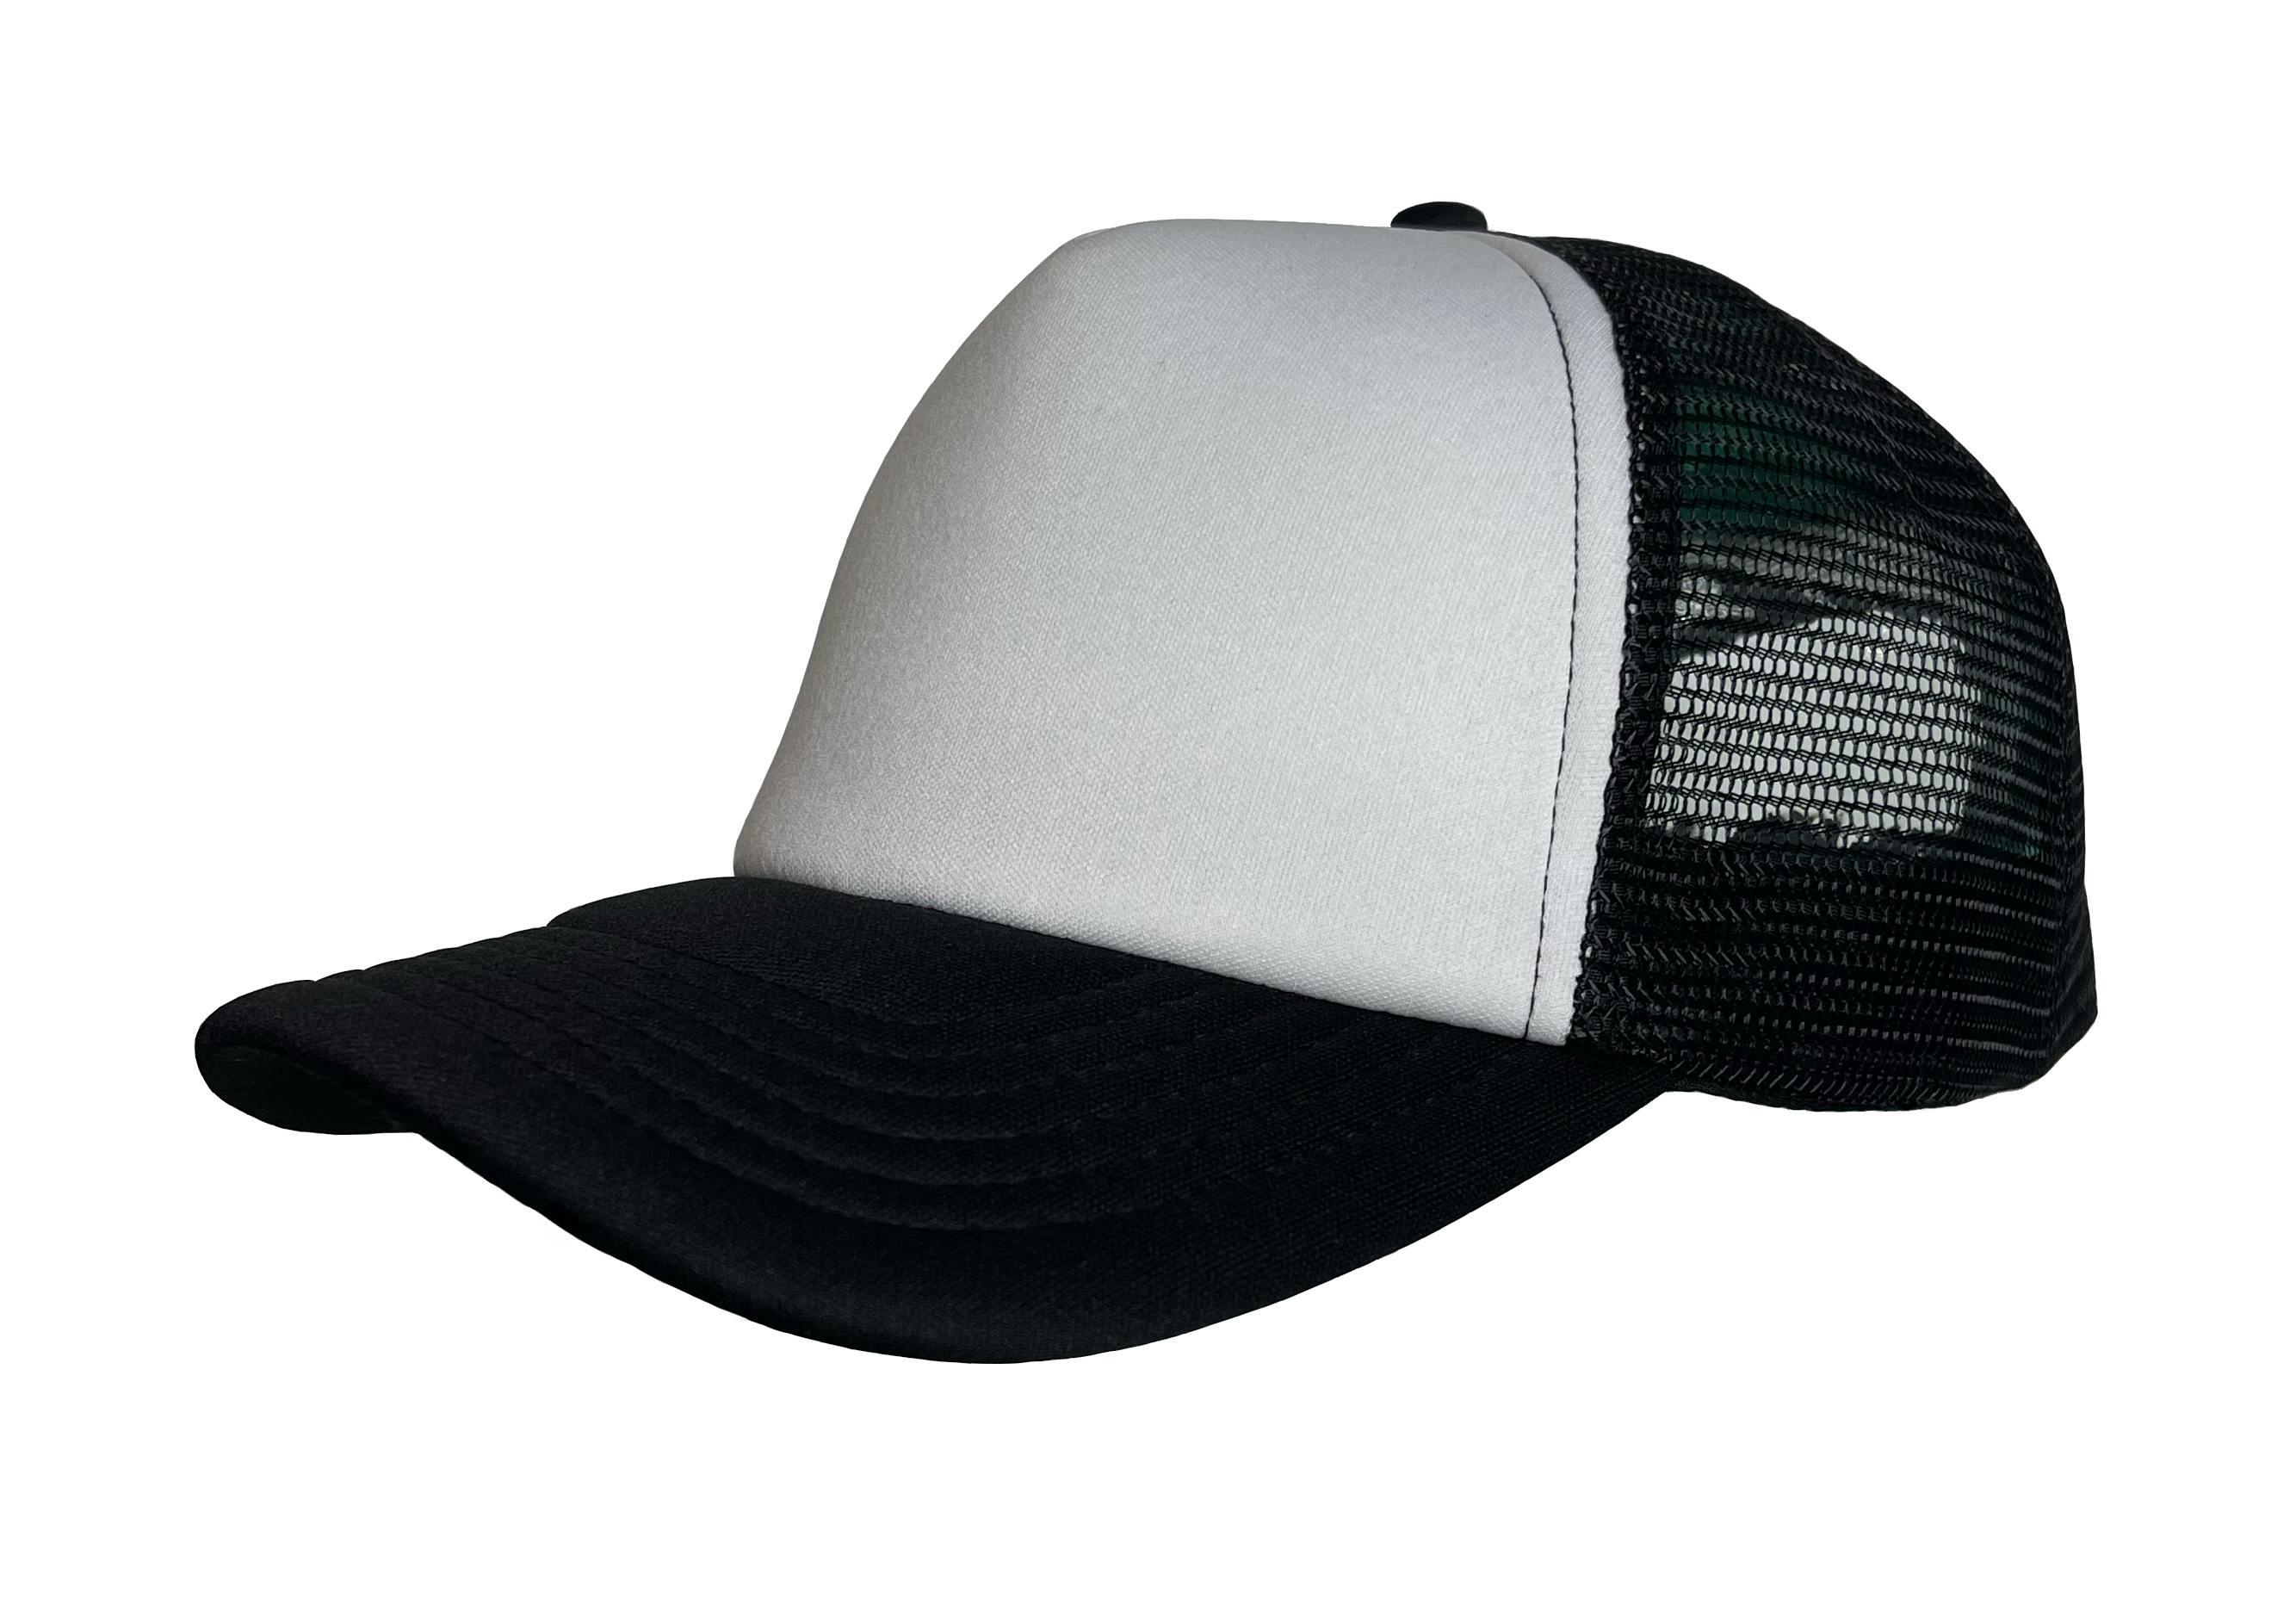 5 PANEL TRUCKER CAP WITH FOAM FRONT & PEAK WITH SNAP CLOSURE